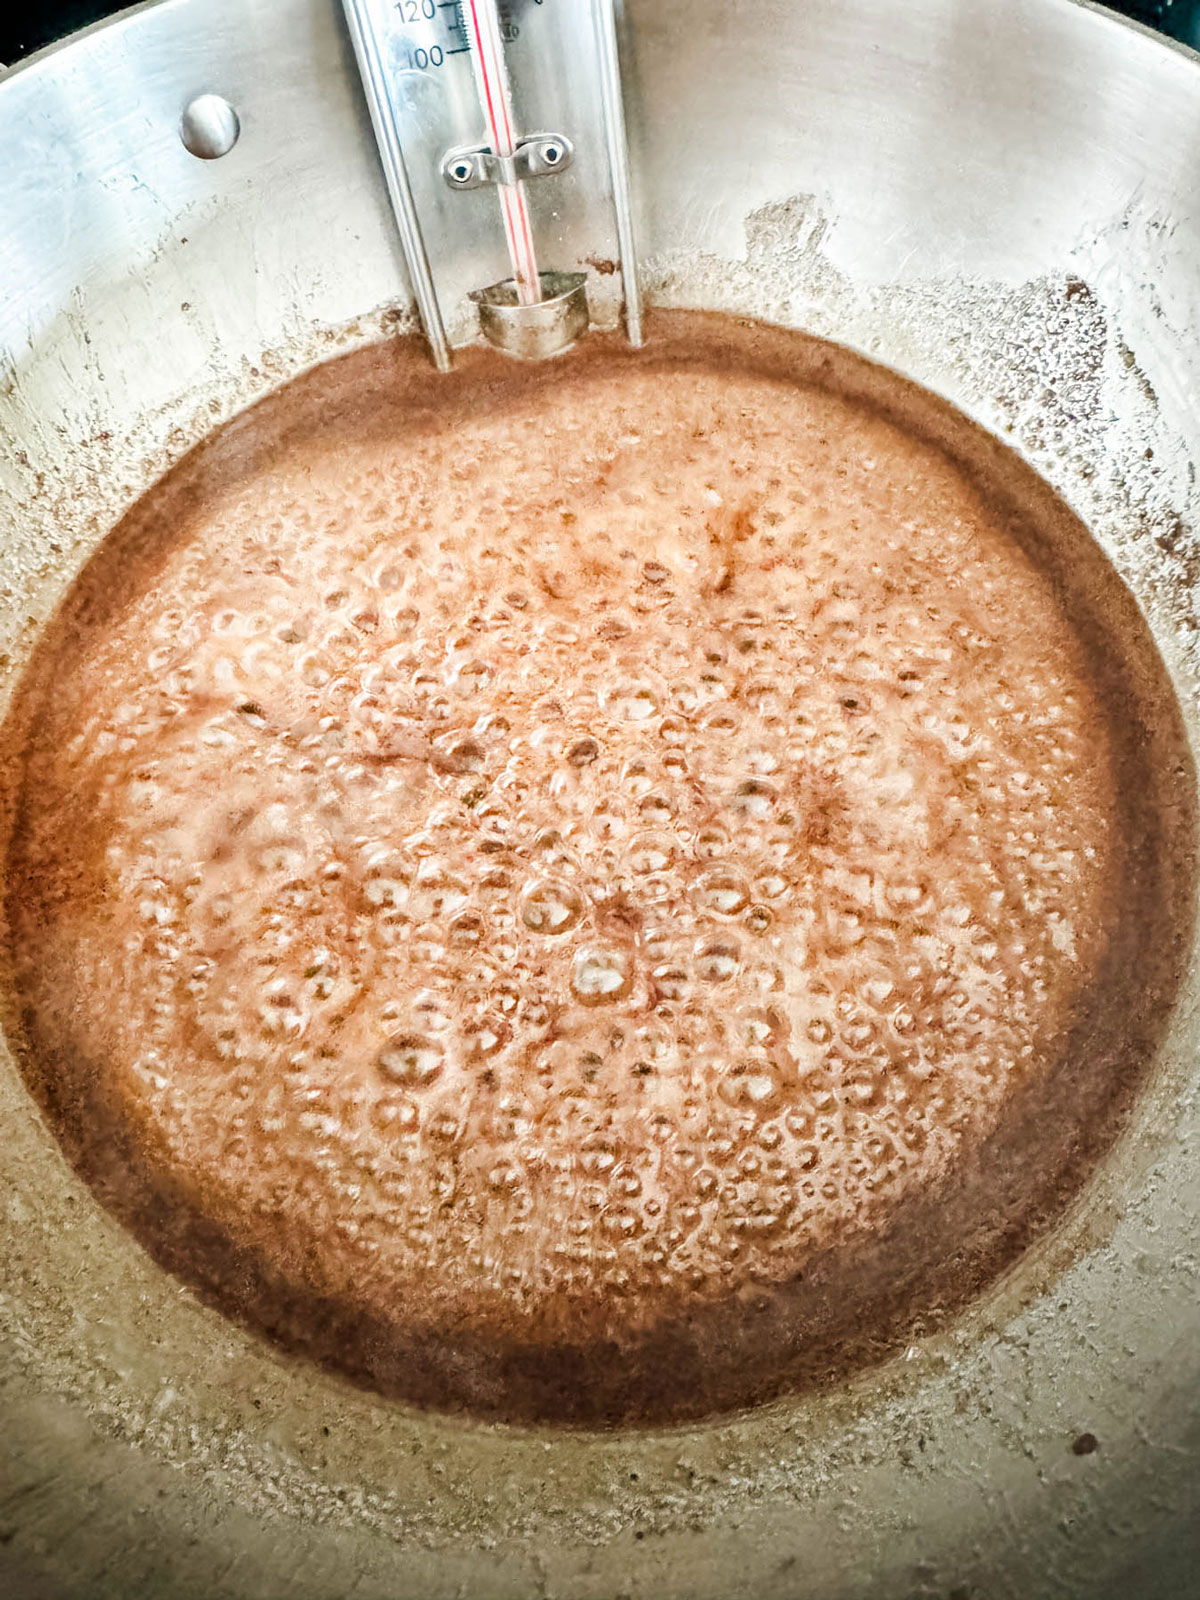 A spiced sugar mixture just starting to bubble in a saucepan.